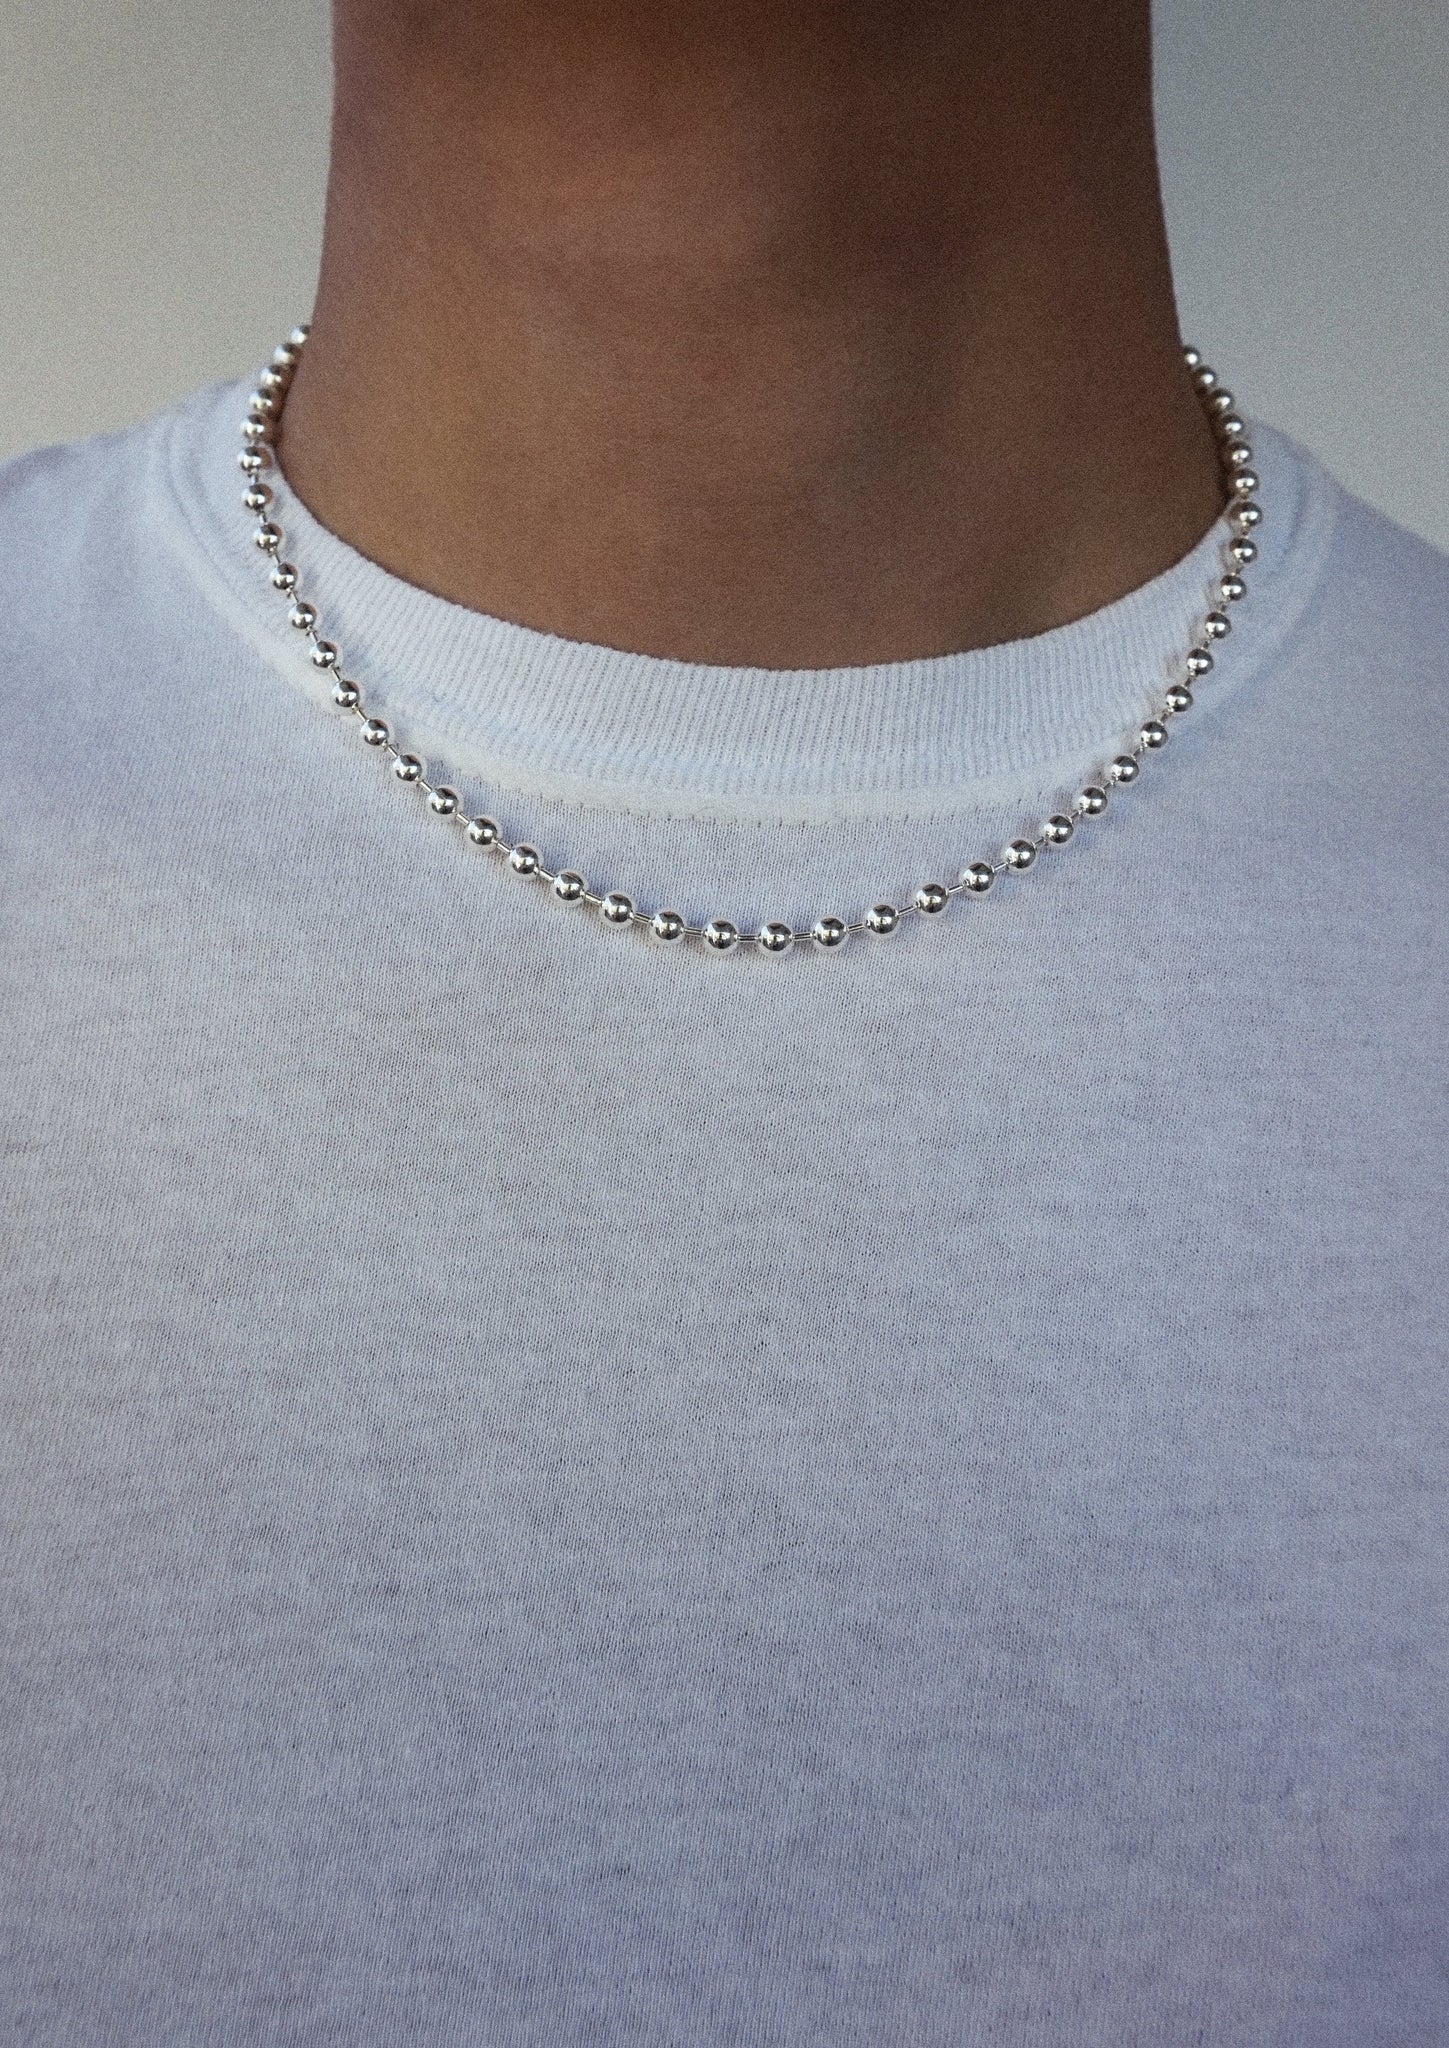 The Ball Chain Necklace